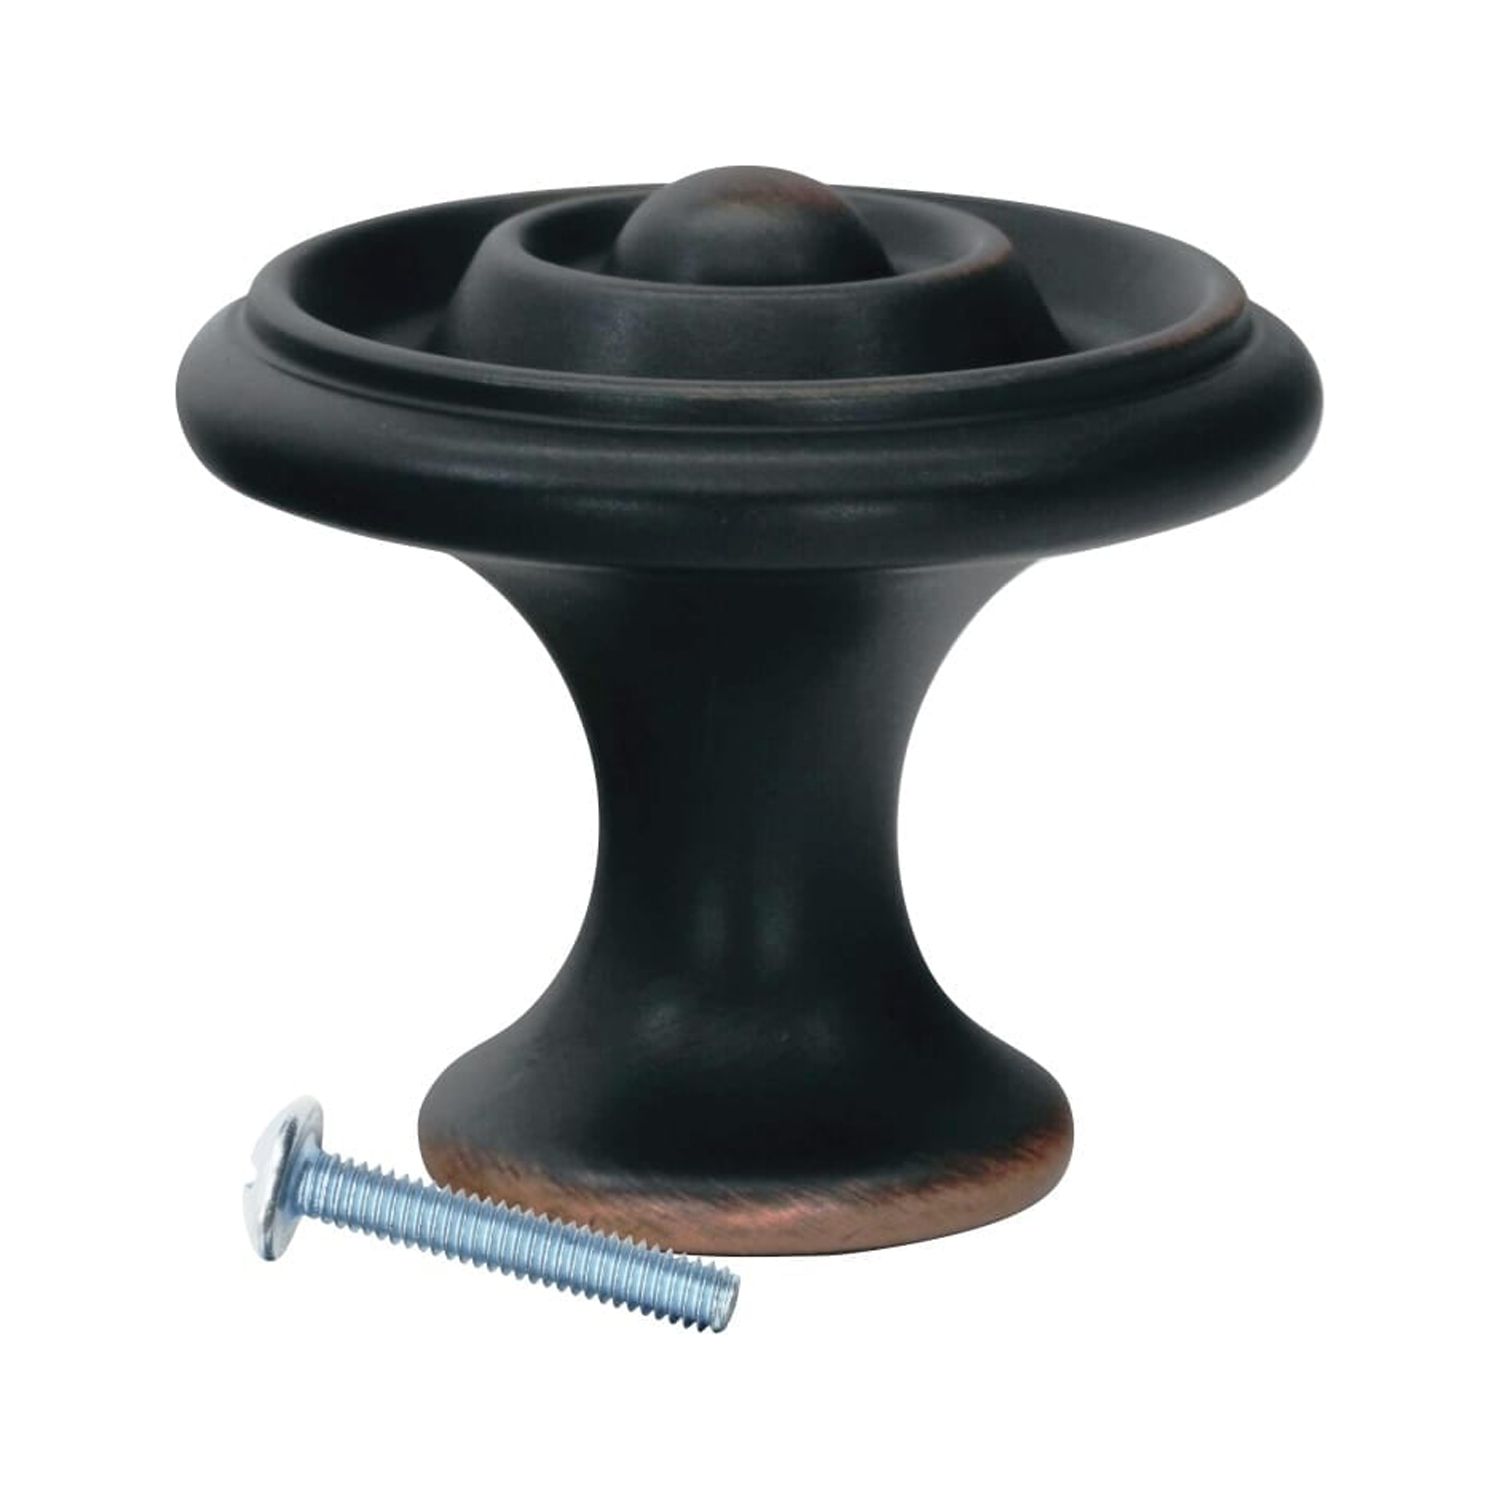 Orbit Ring Style Brushed Oil-Rubbed Bronze Cabinet Hardware Knob, 1-11/16 Inch Diameter - image 2 of 2